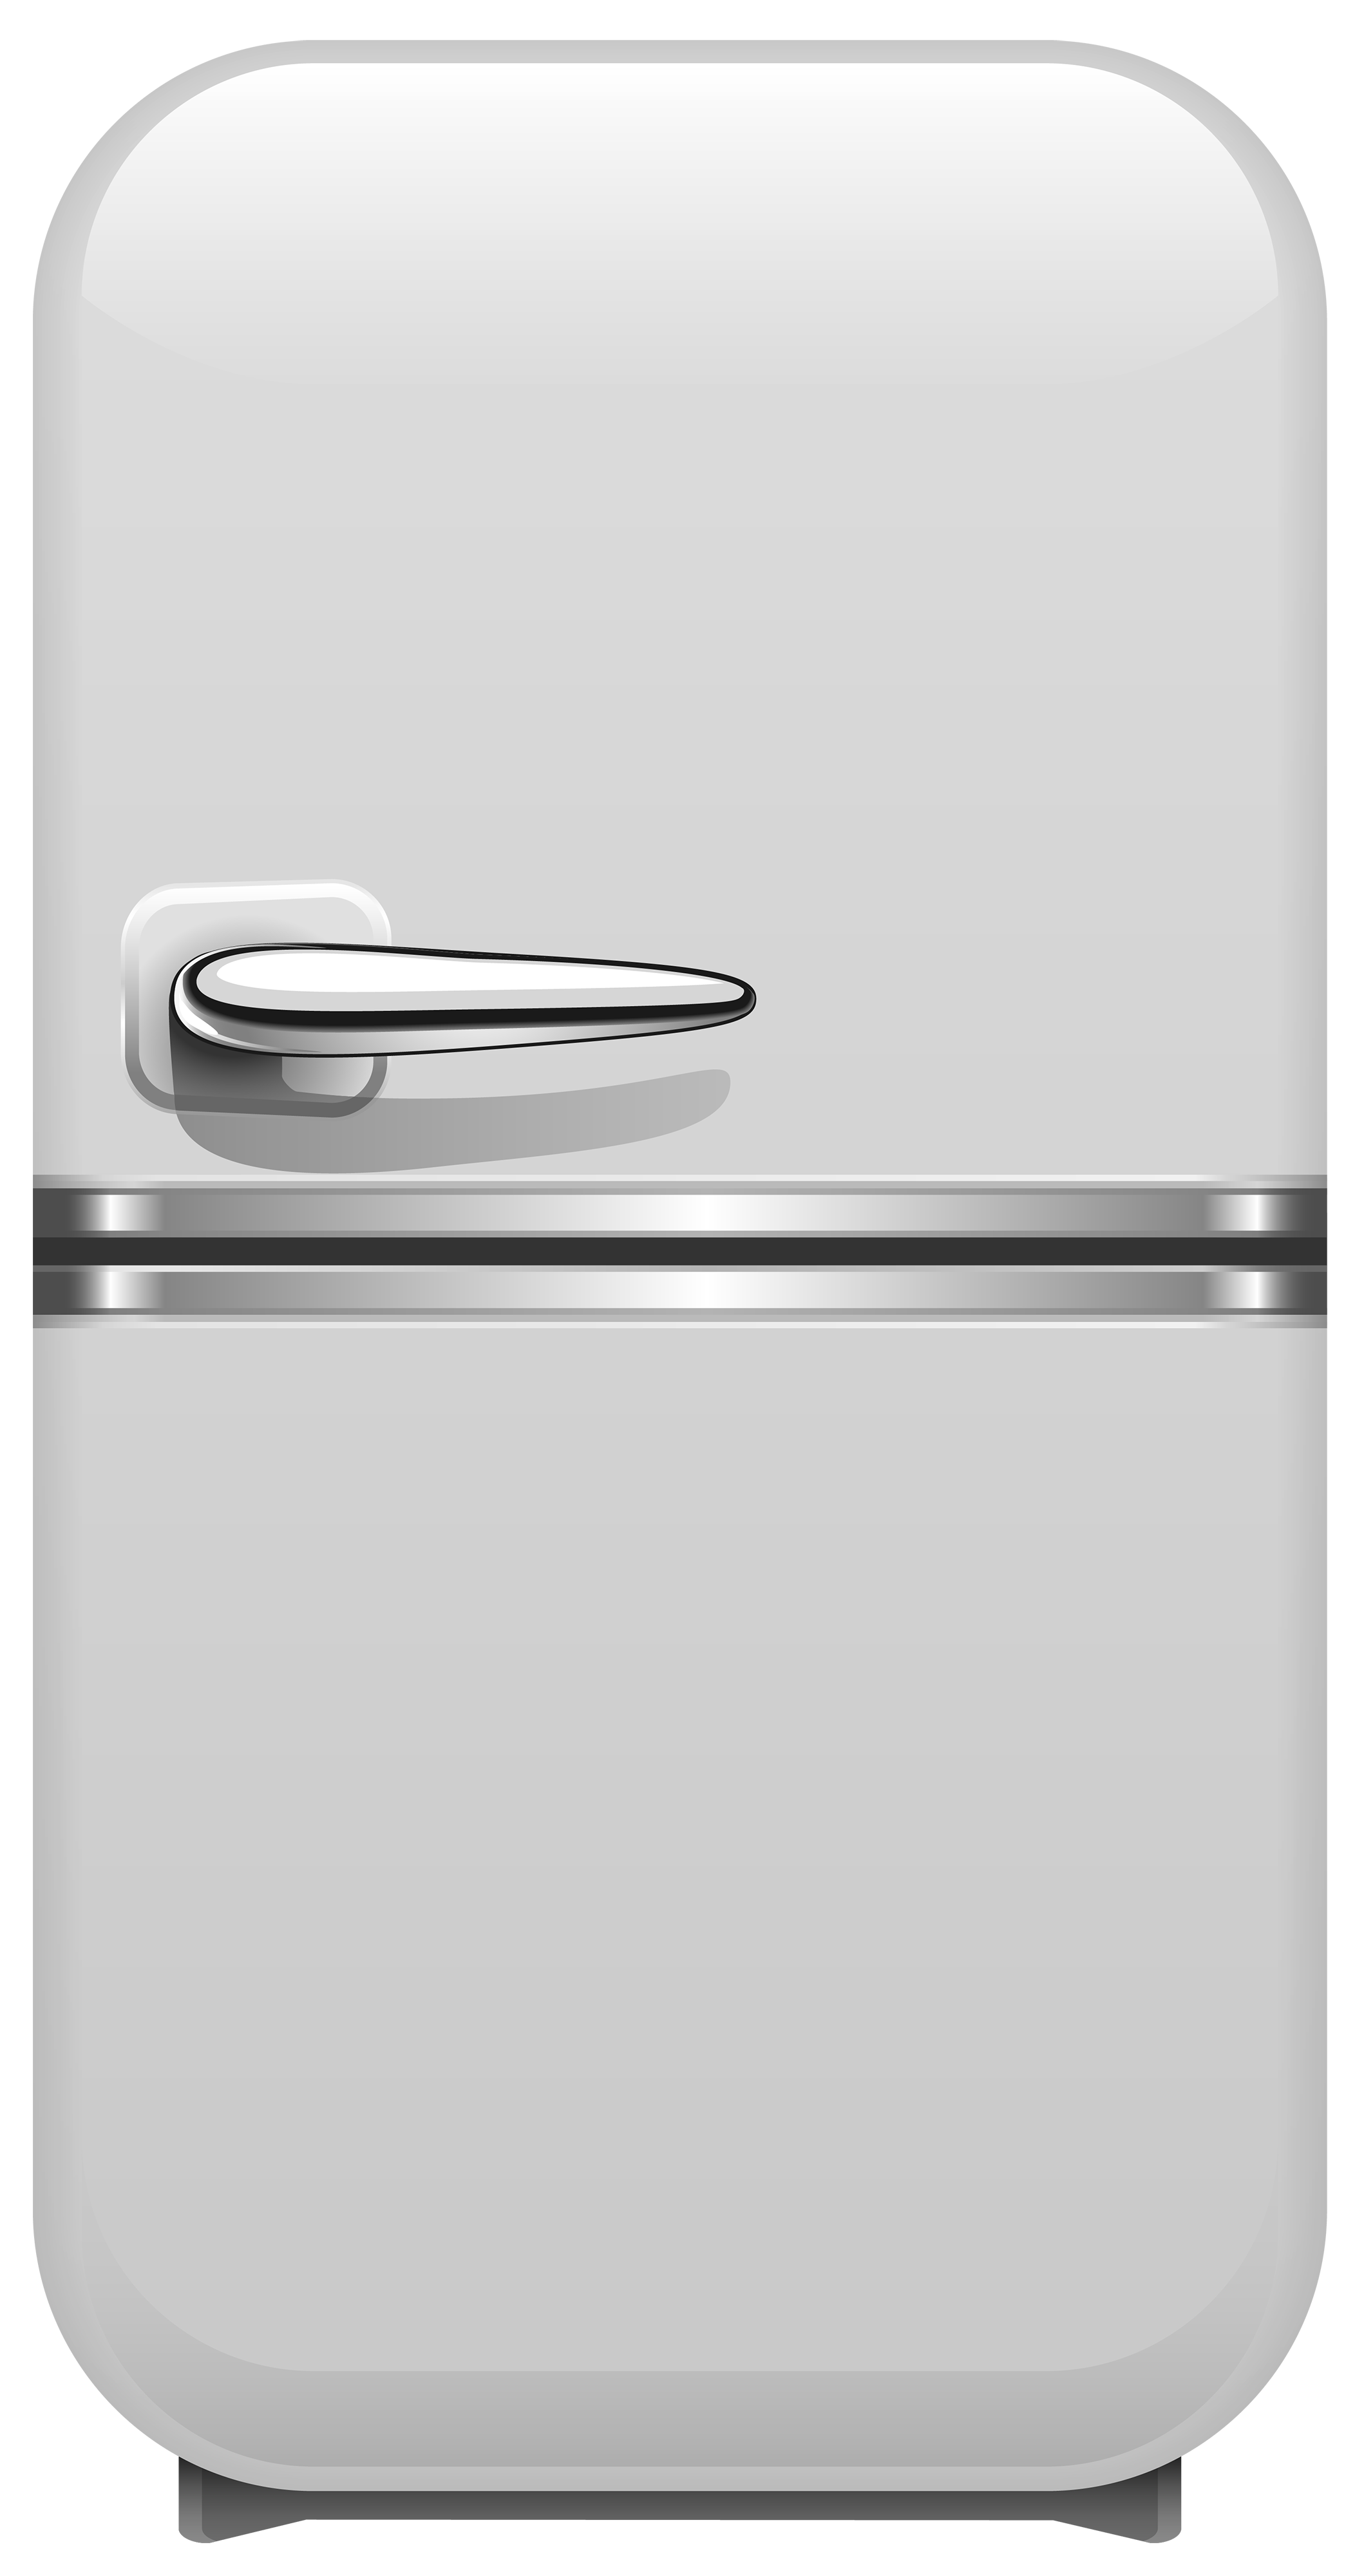 refrigerator clipart black and white - photo #26